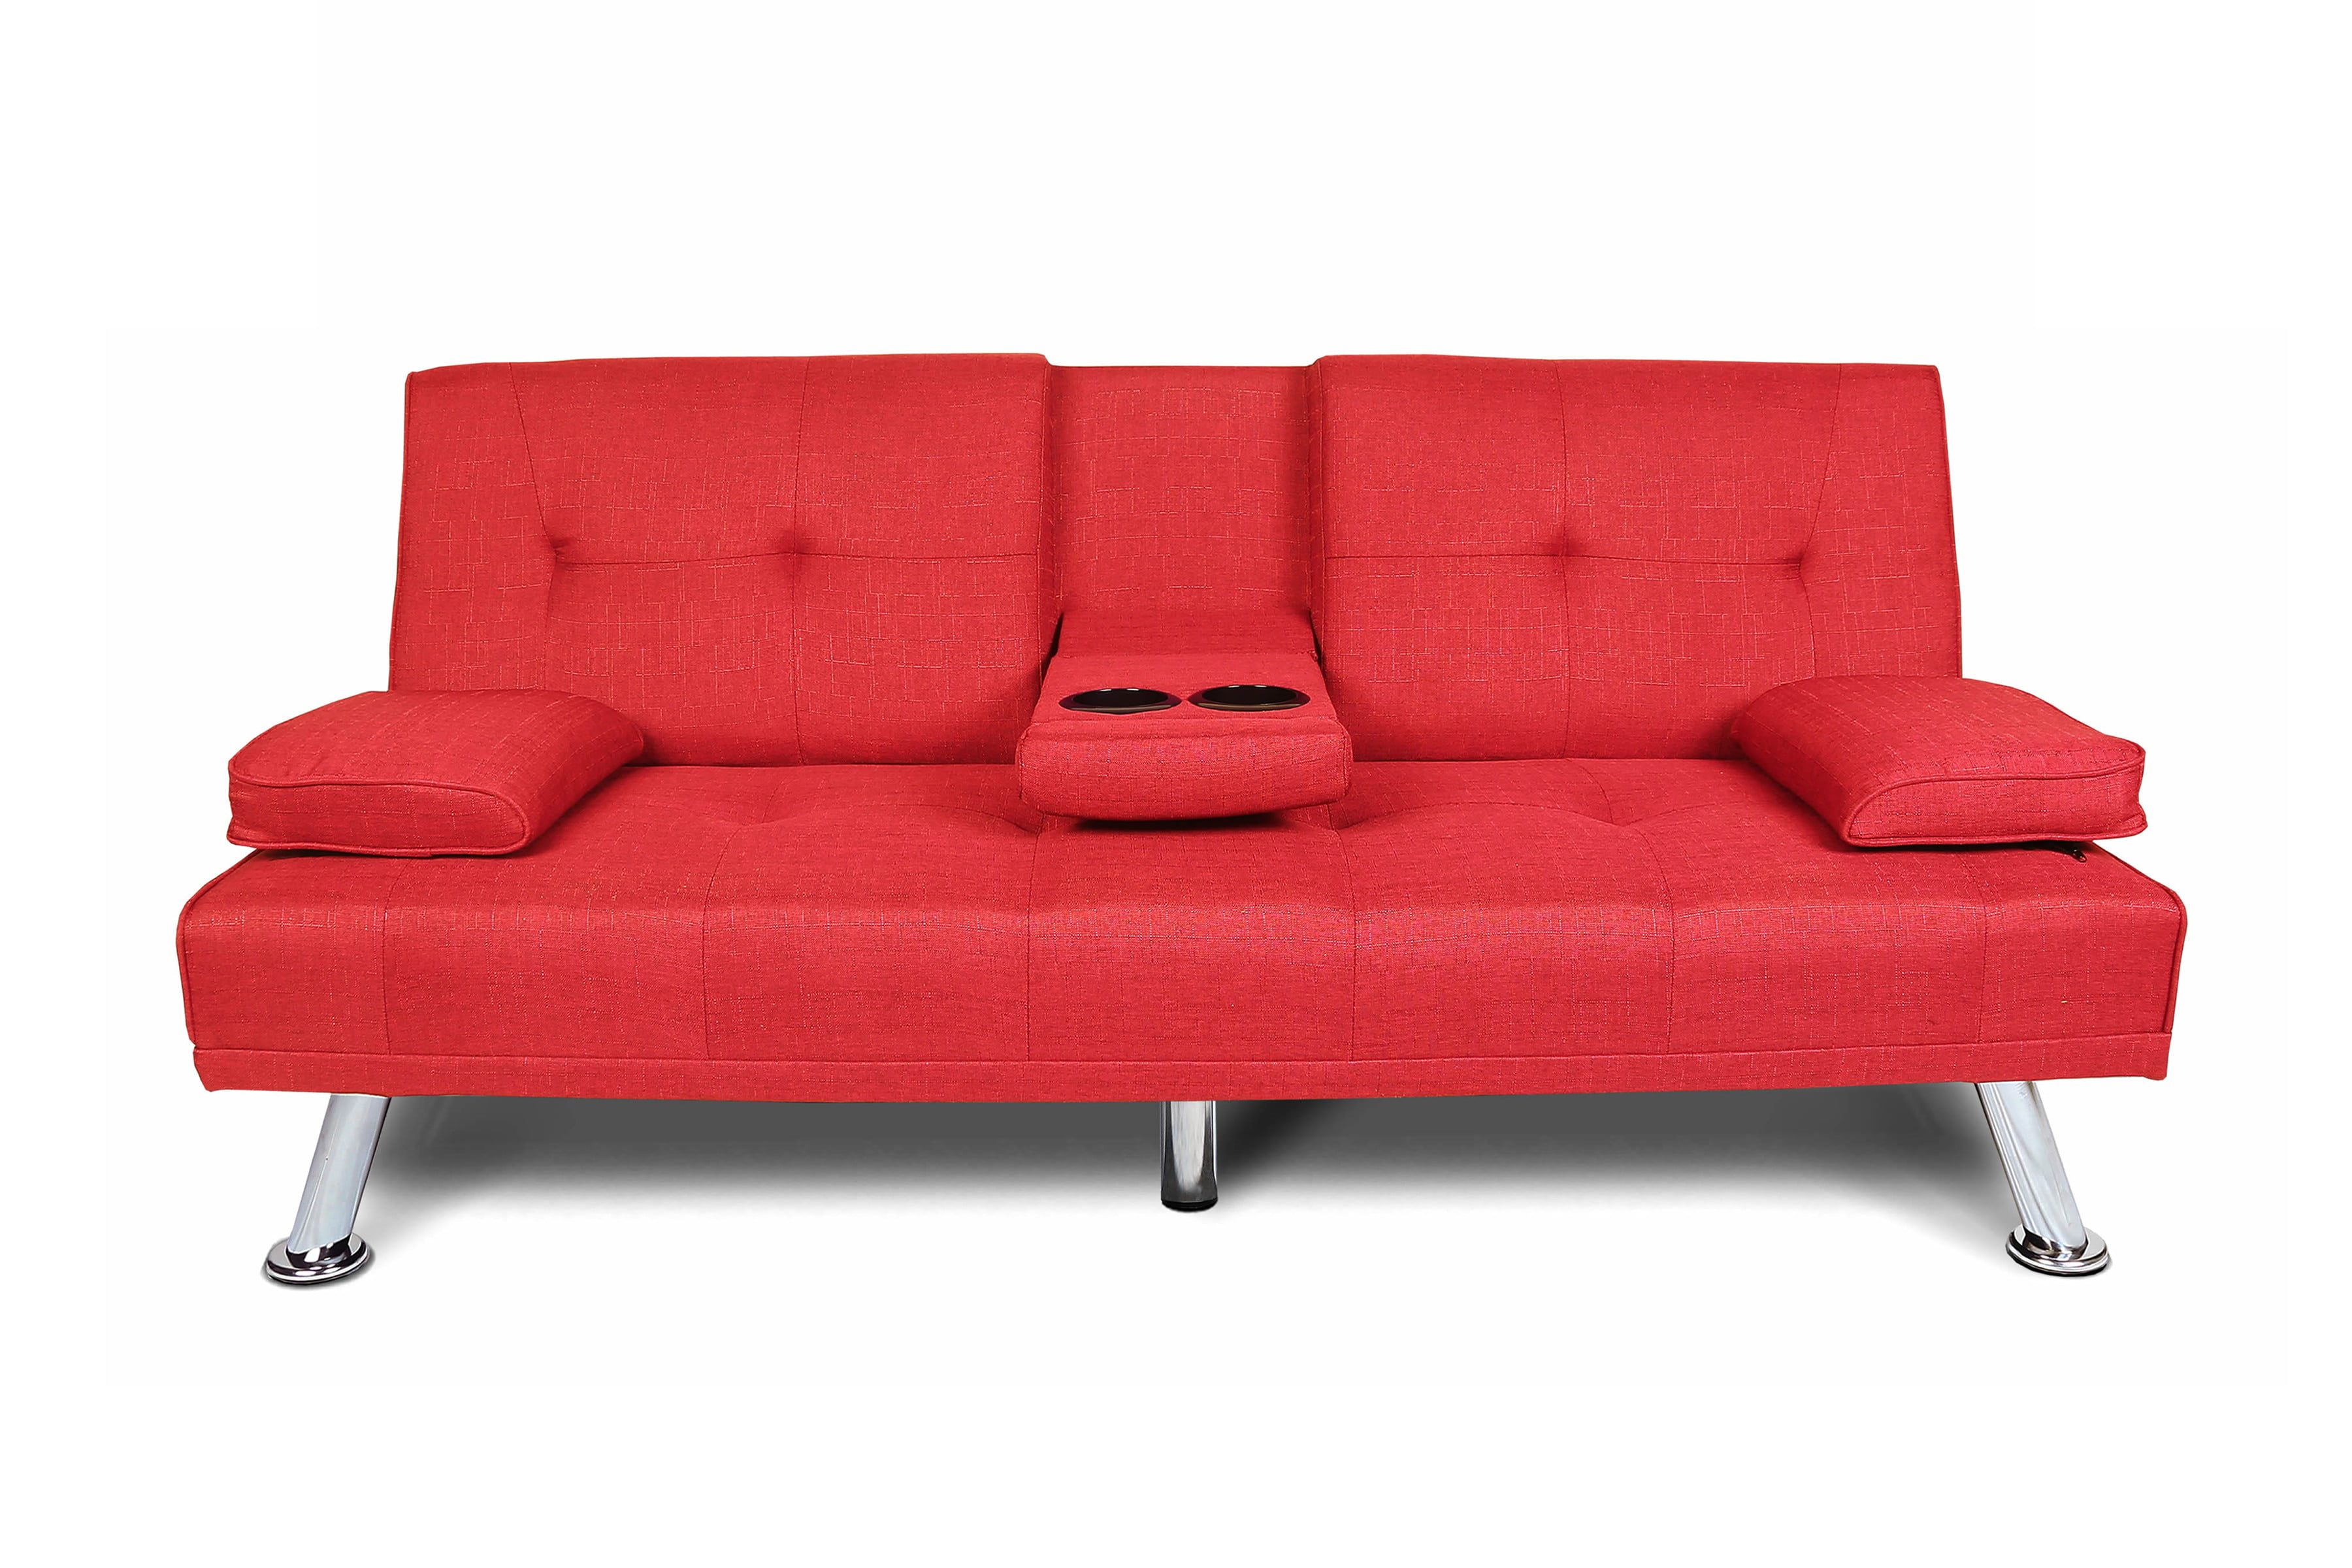 Red Sleeper Sofa Convertible Couch Full Bed Futon Living Room Furniture Guests 